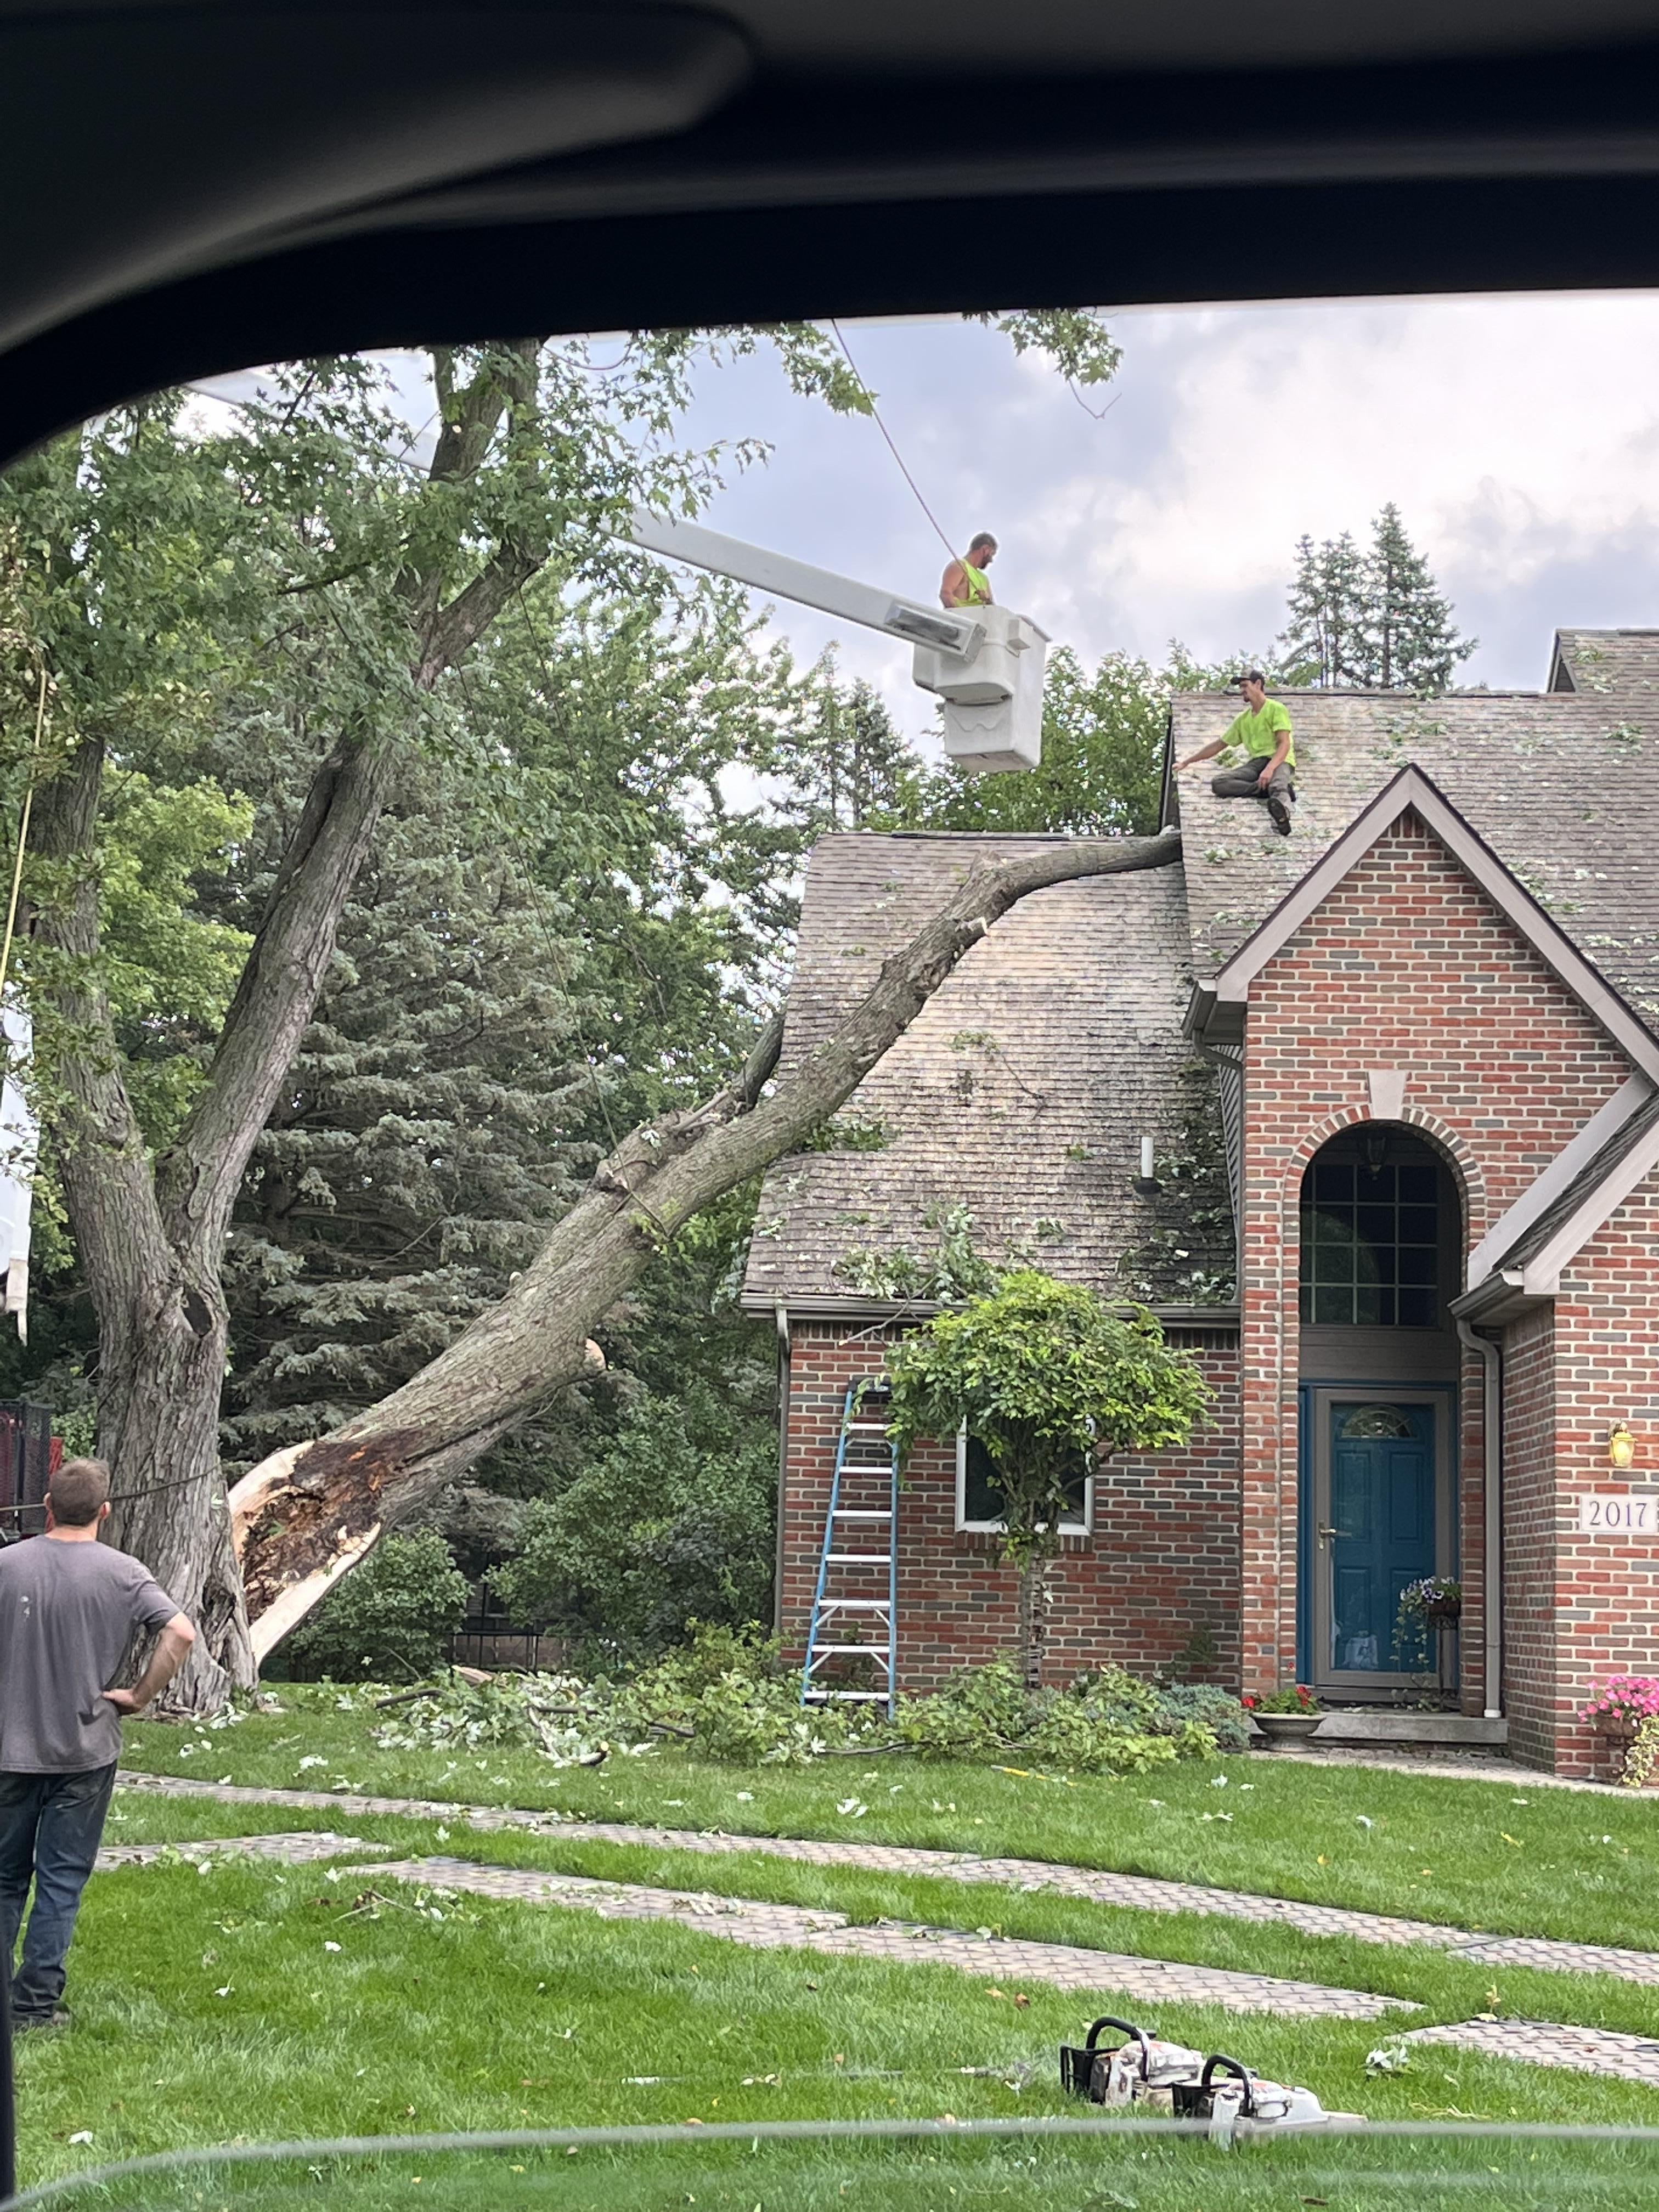 Tree fell on building from wind storm